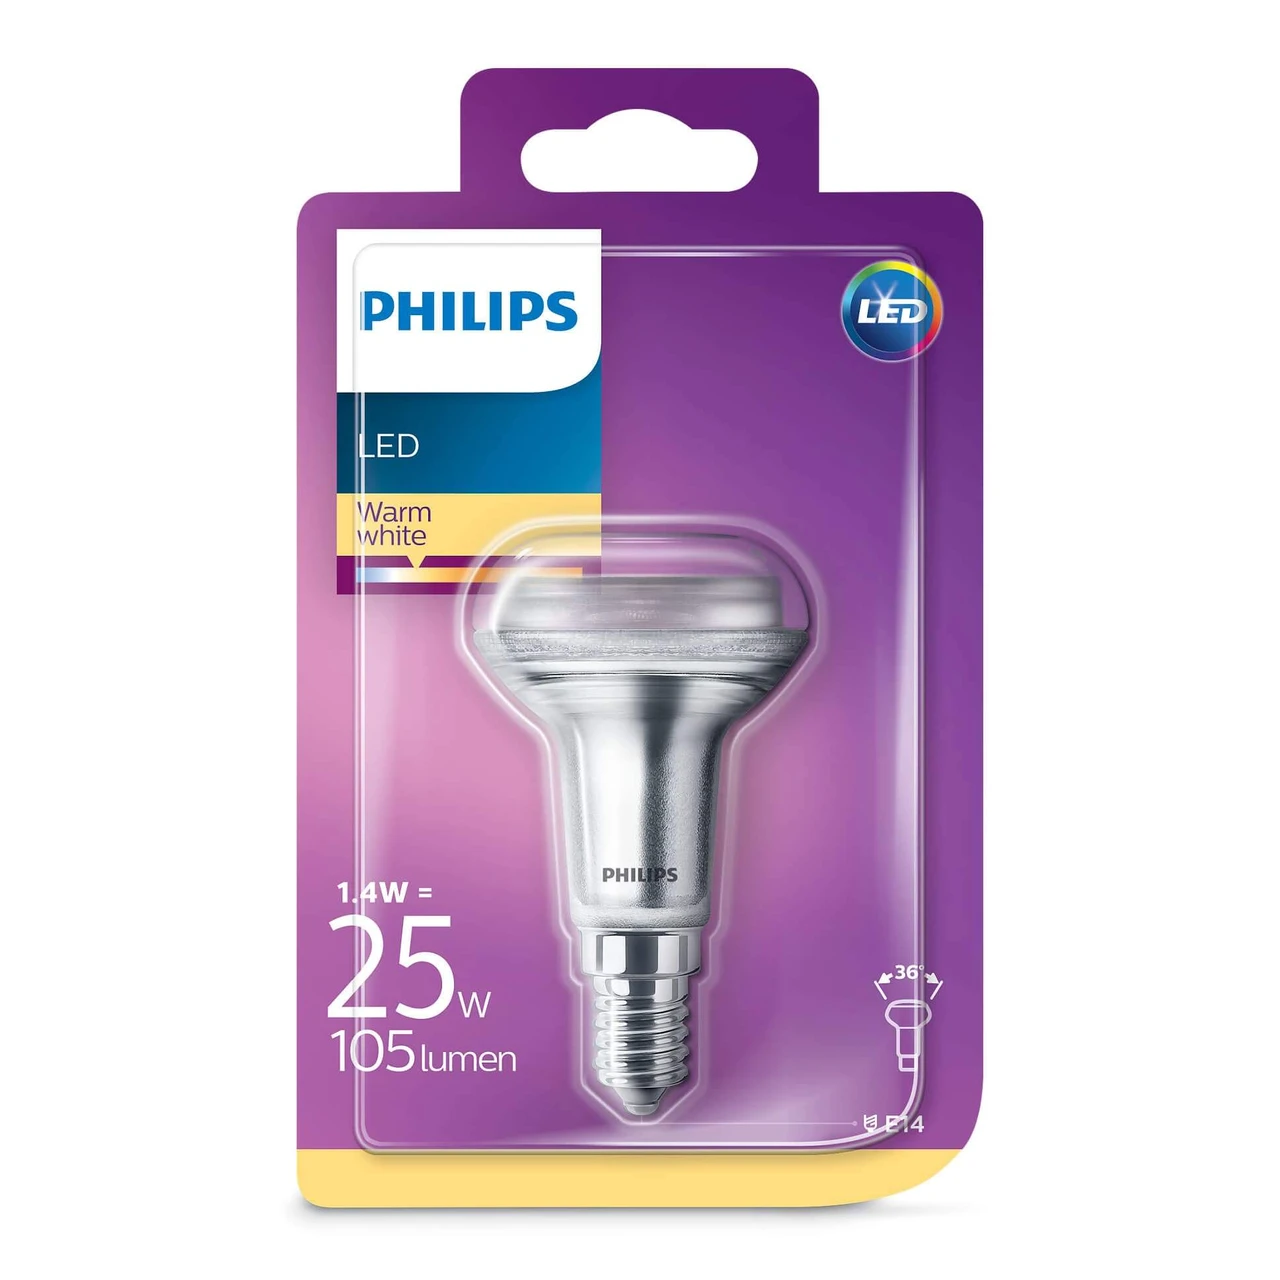 LED 1,4W (105lm) Reflector E14 - Philips - Buy online